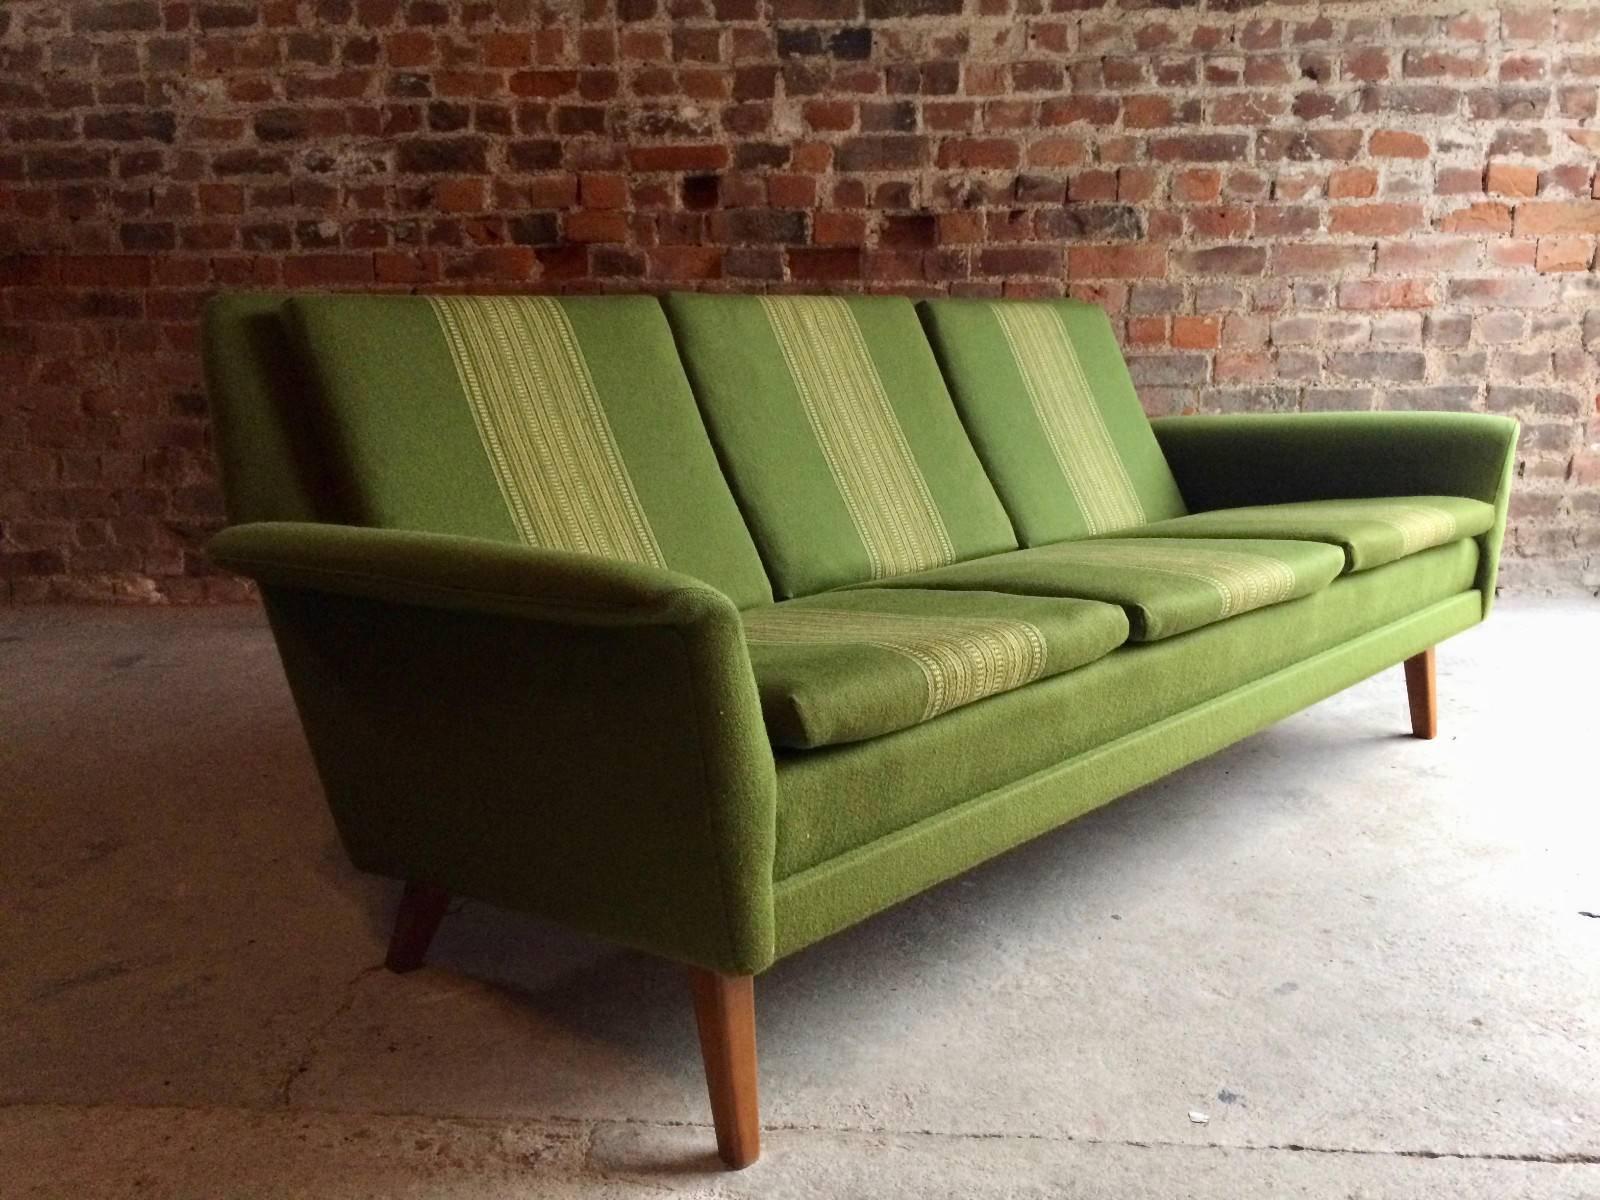 Magnificent midcentury three-seat sofa designed by Folke Ohlsson and manufactured by Fritz Hansen in the 1960s for DUX. The sofa is upholstered in its original green striped fabric and raised on tapering teak legs.